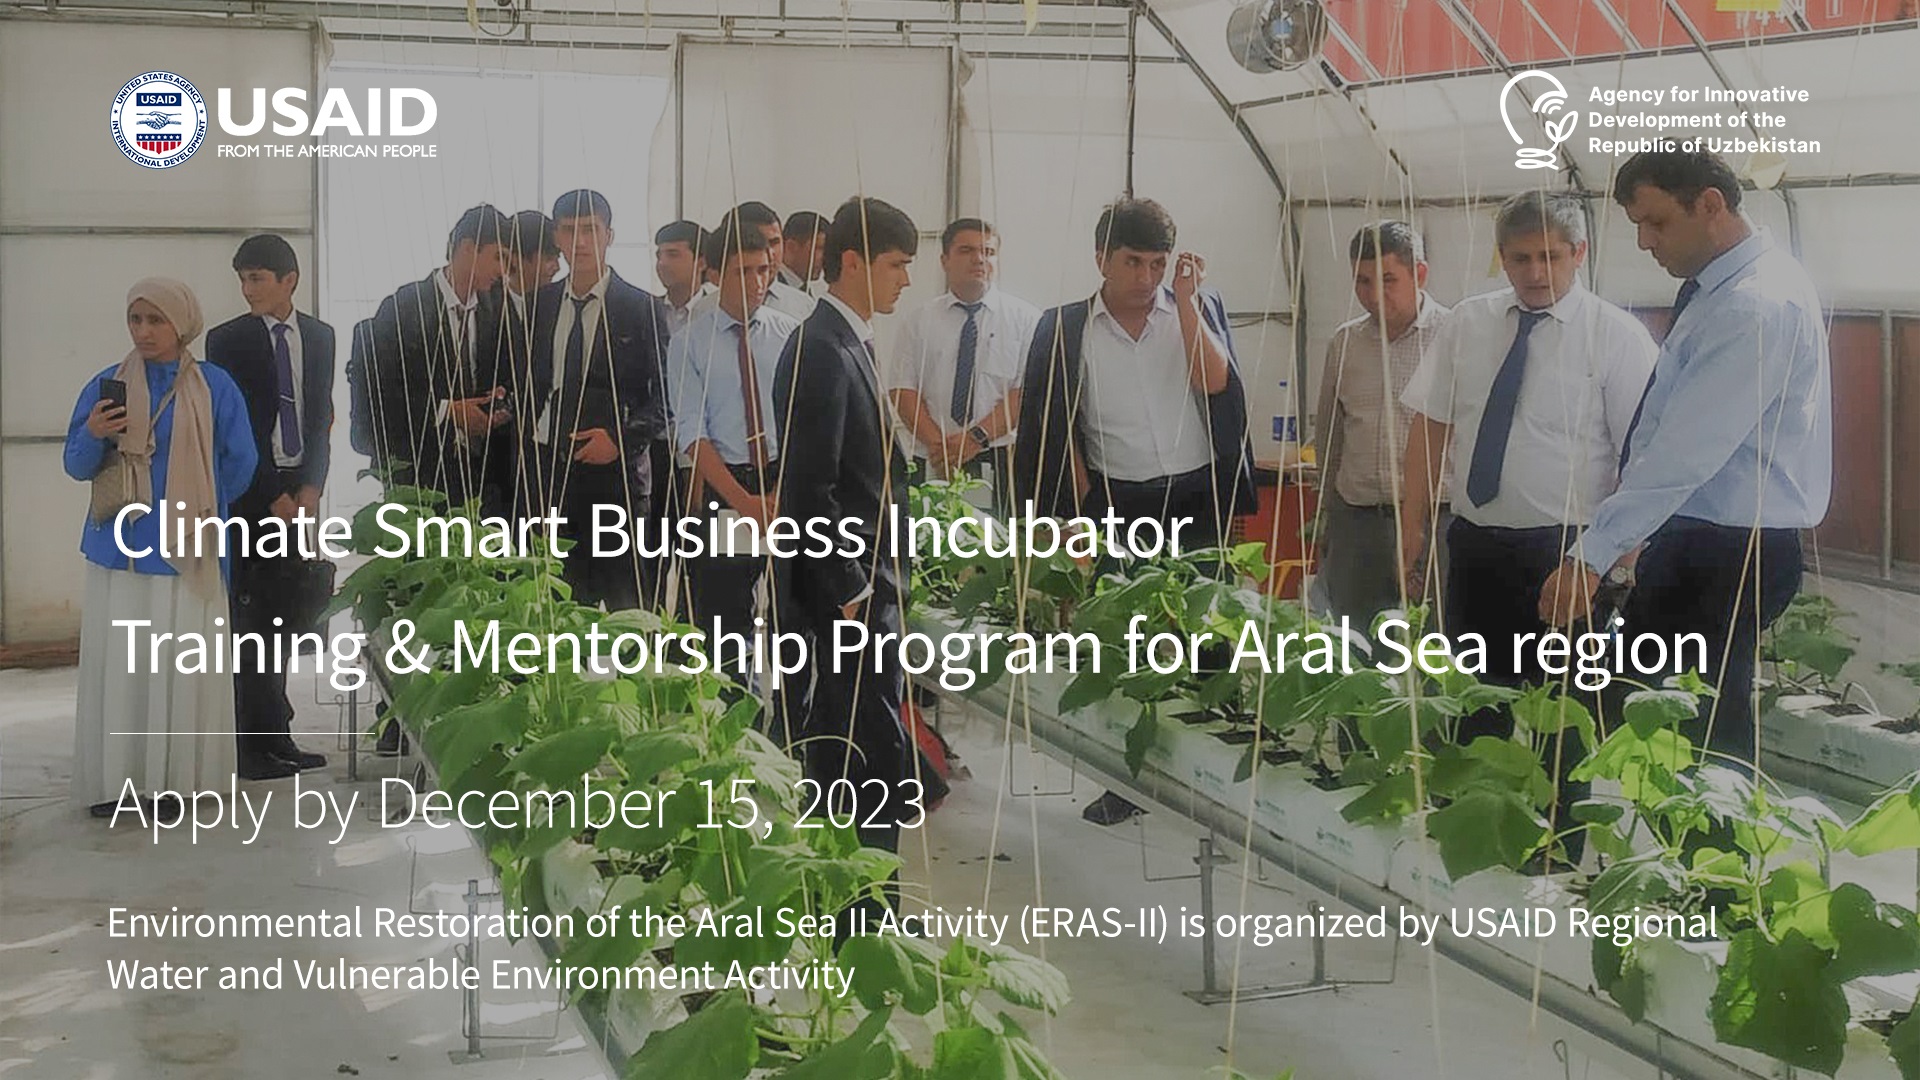 The deadline for applications for the Climate Smart Business Incubation Program has been extended until December 25